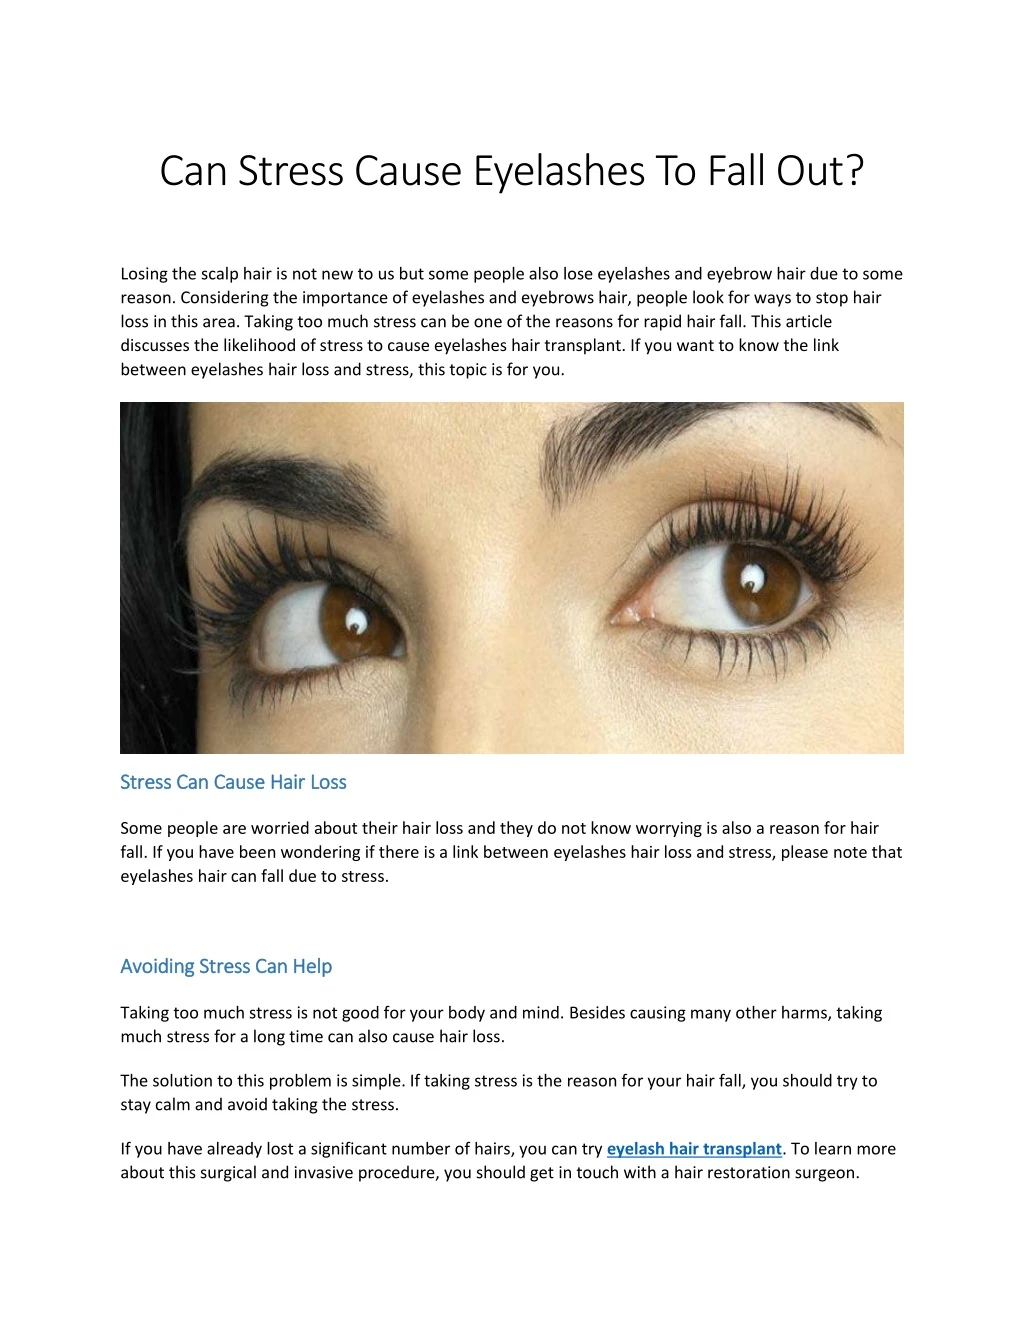 can stress cause eyelashes to fall out